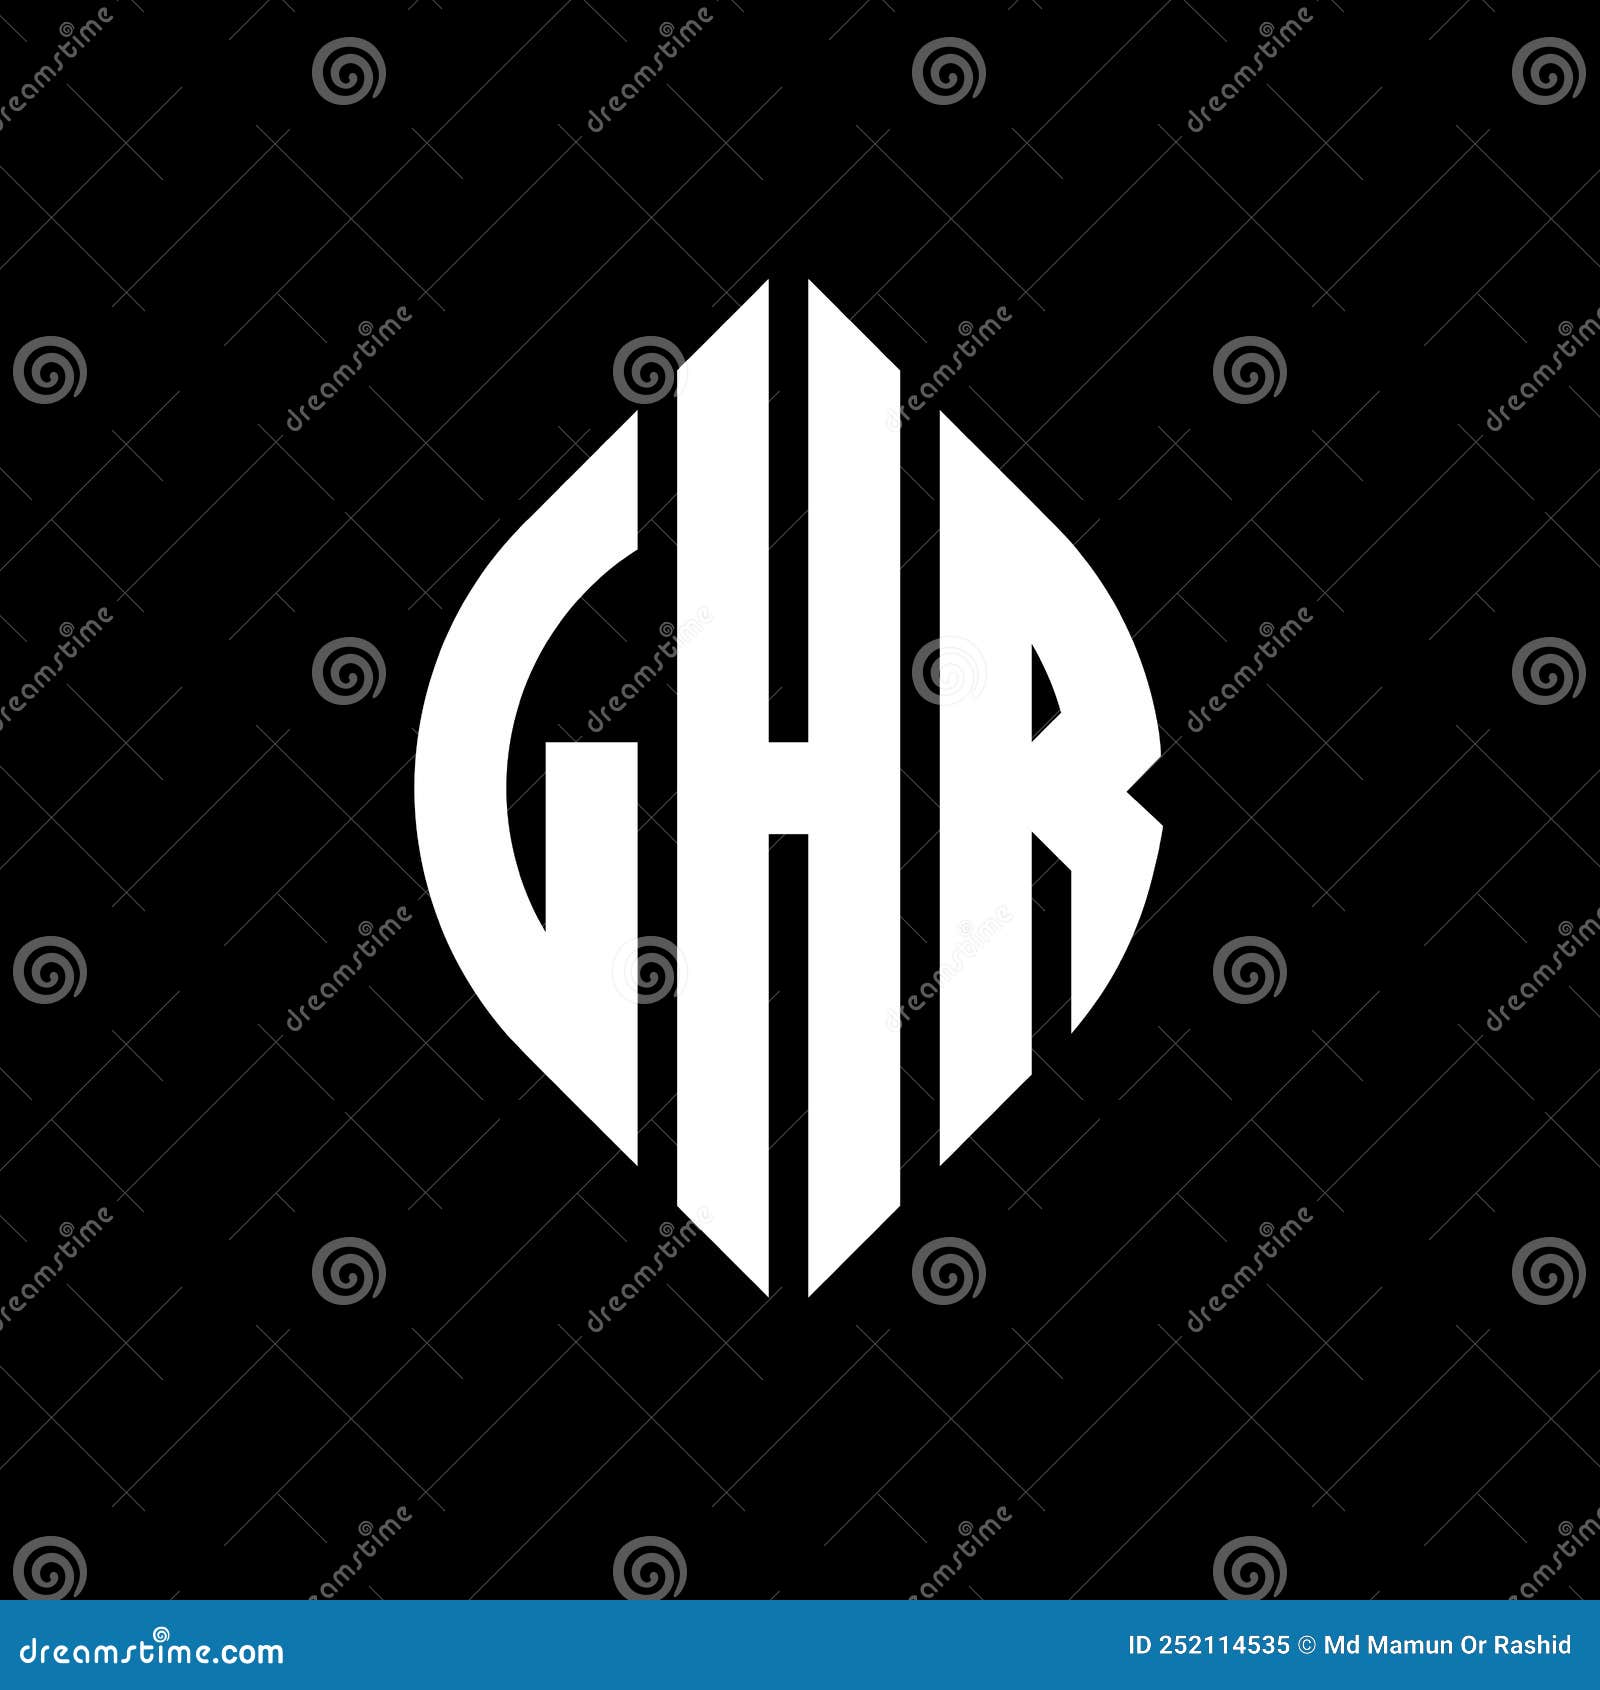 lhr circle letter logo  with circle and ellipse . lhr ellipse letters with typographic style. the three initials form a